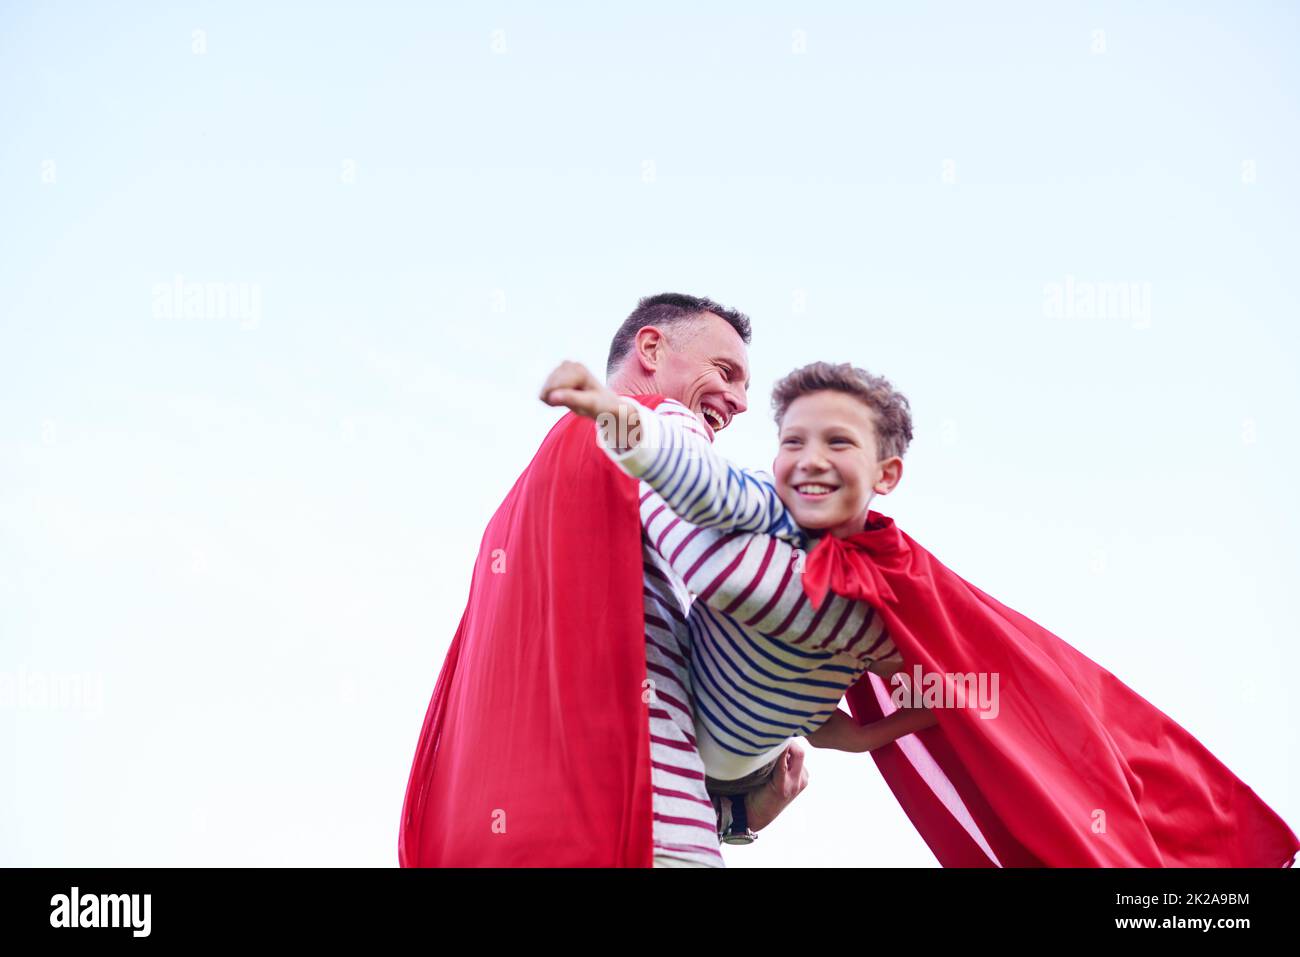 Into the wild blue yonder. Shot of a father and his young son pretending to be superheroes while playing outdoors. Stock Photo